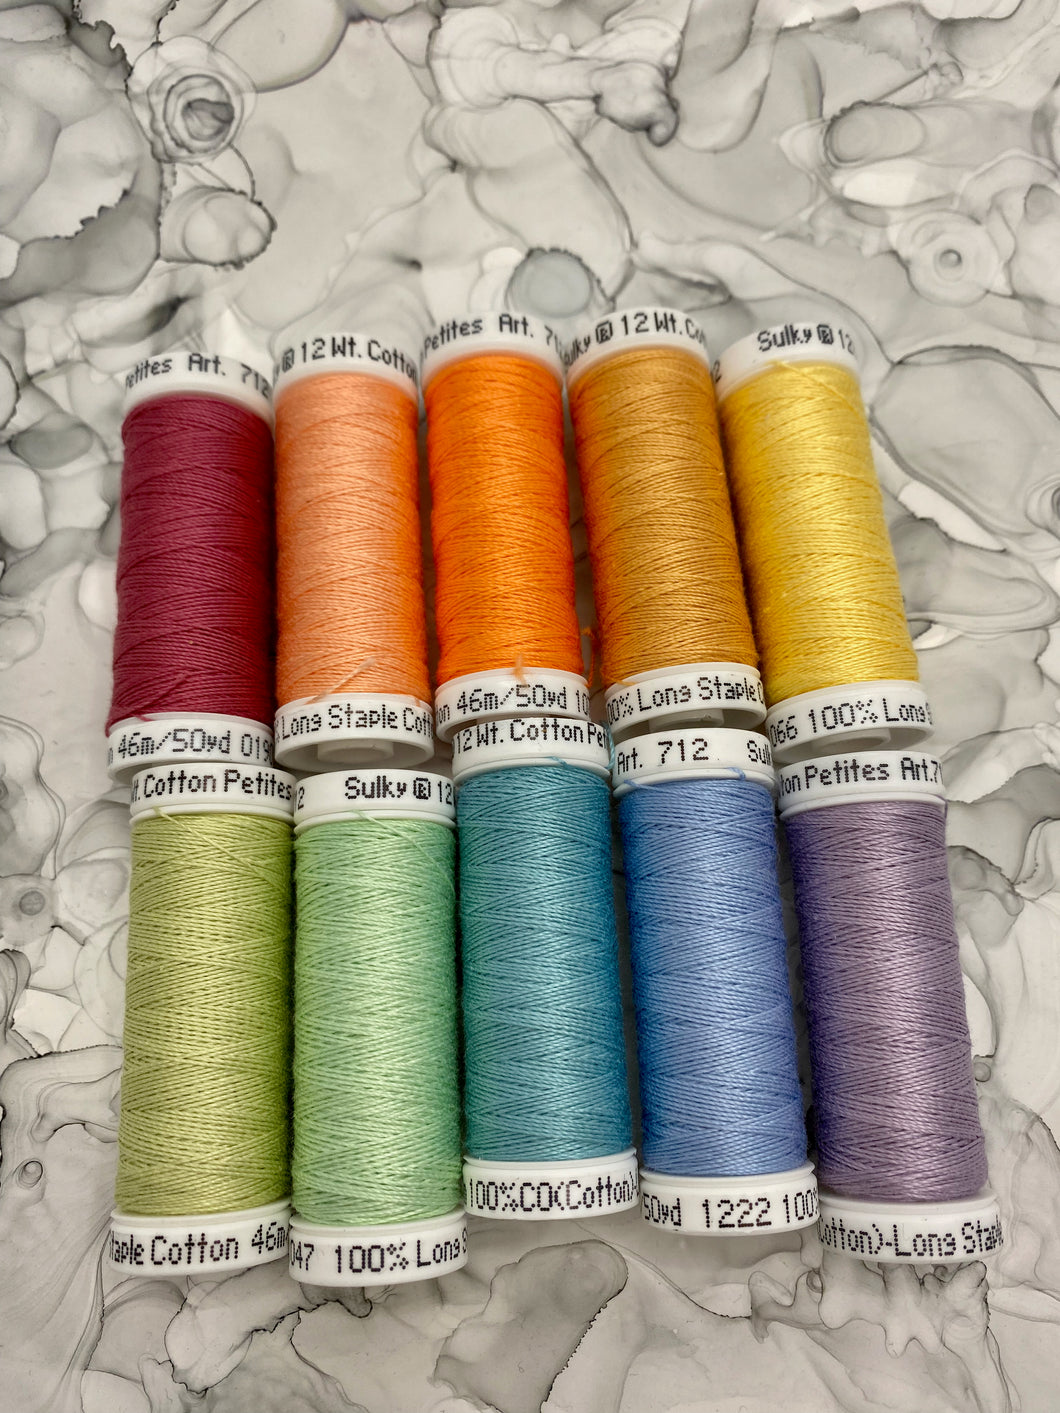 Pastel Rainbow set of Sulky Solid Cotton Thread - 12wt.; 10 spools total